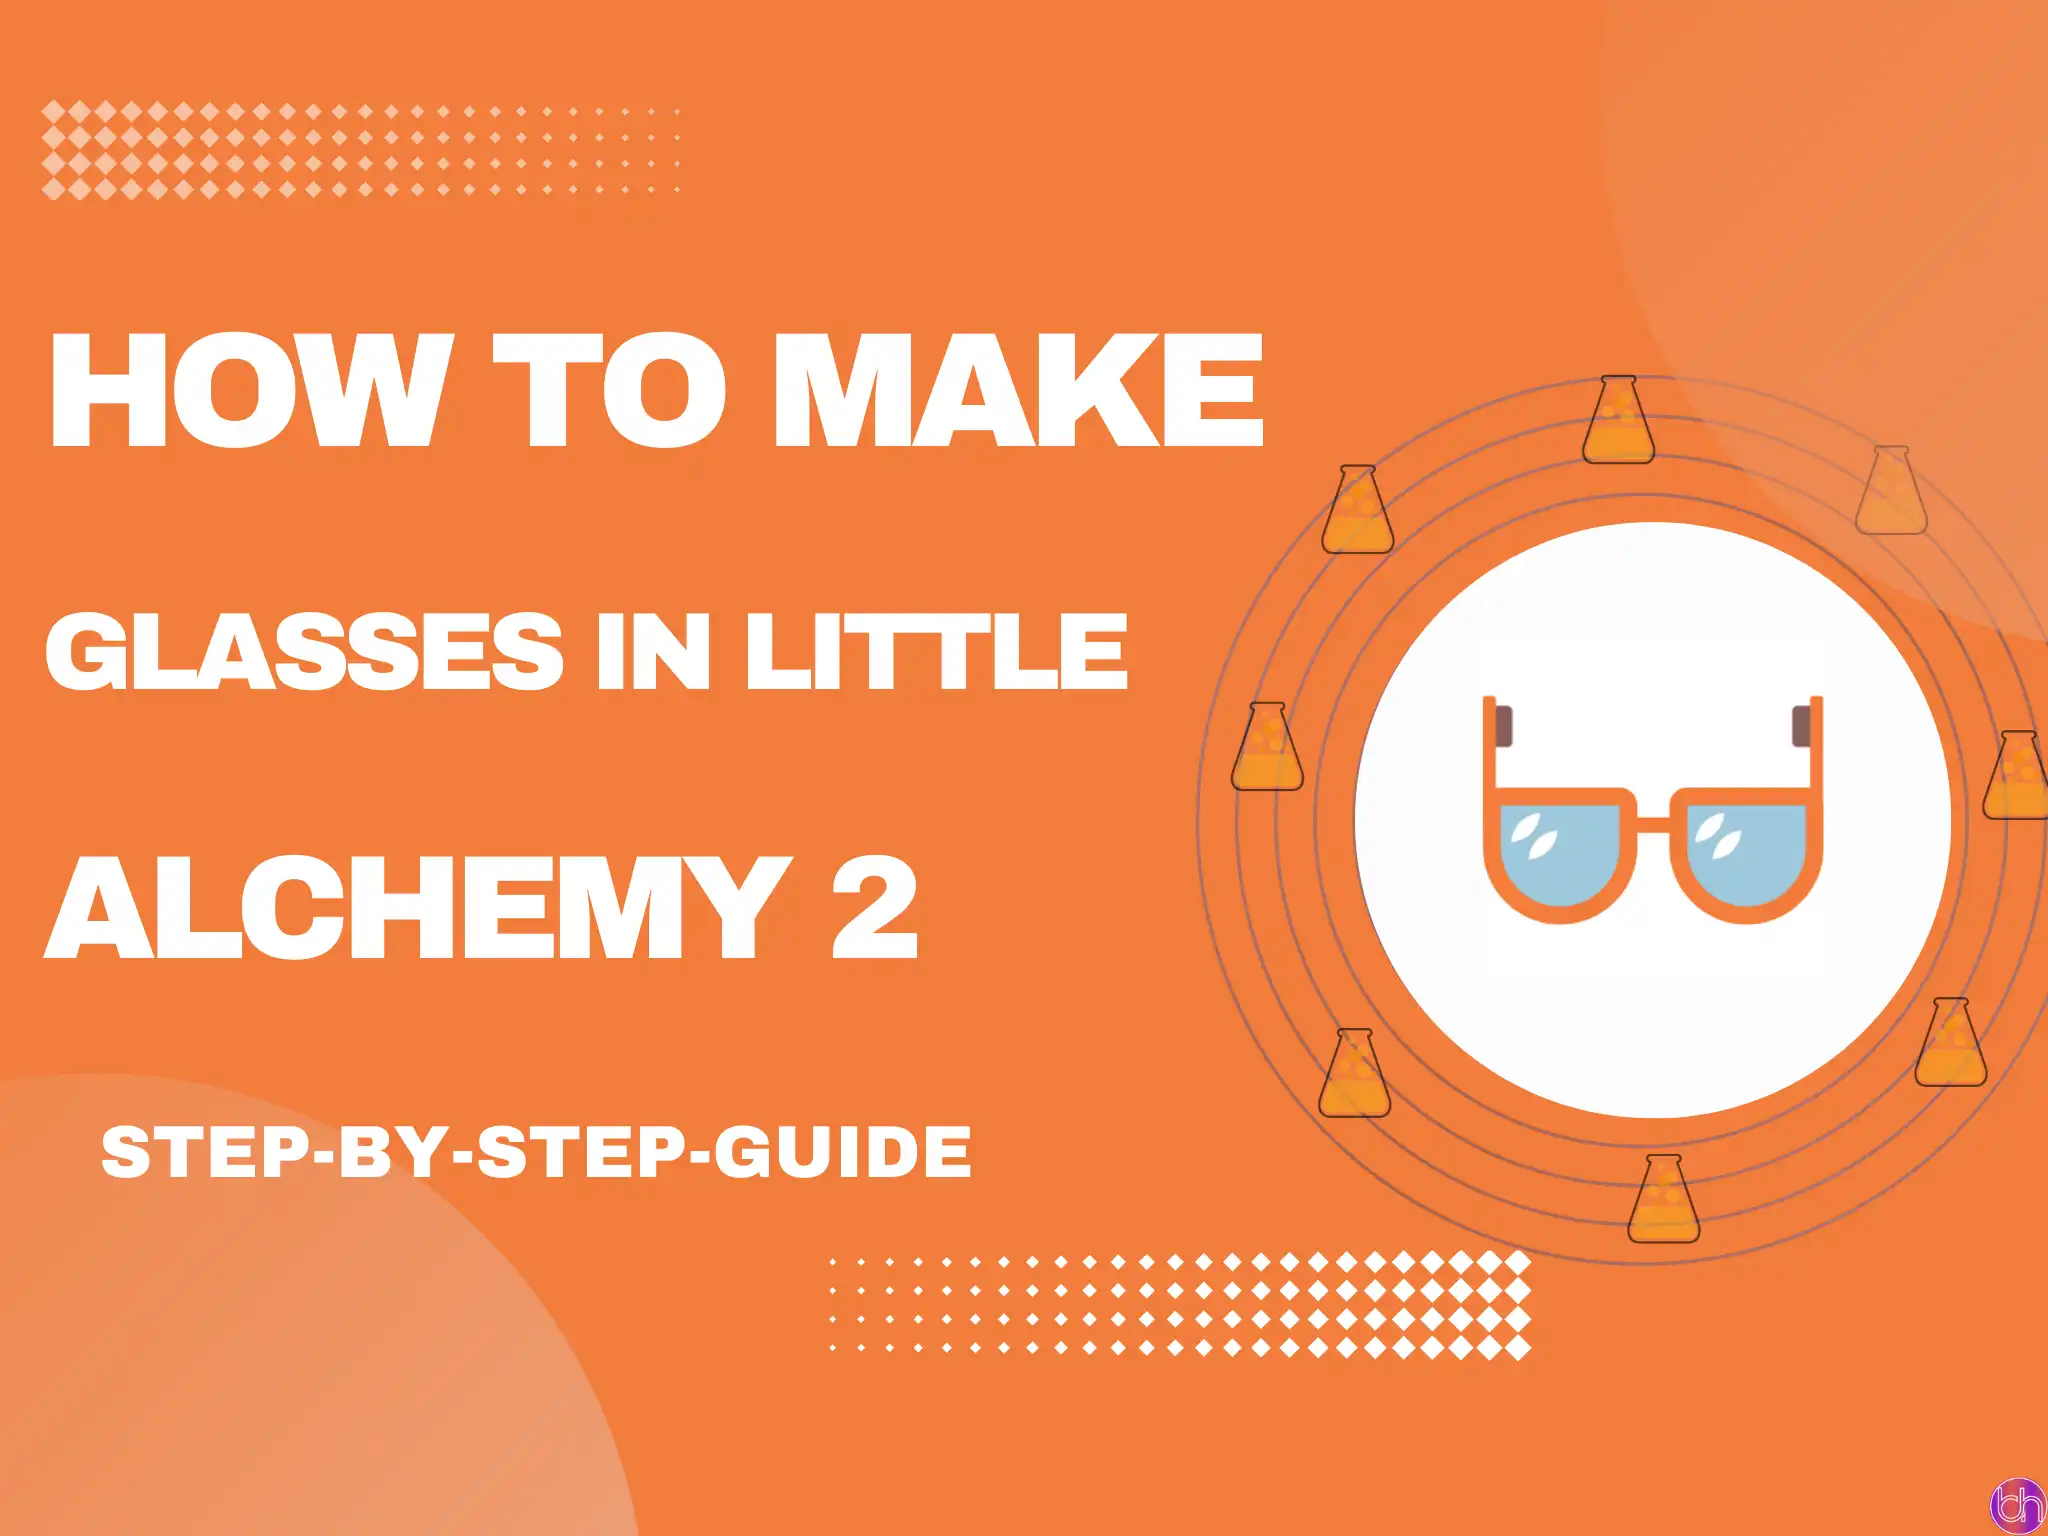 How to make Glasses in little alchemy 2